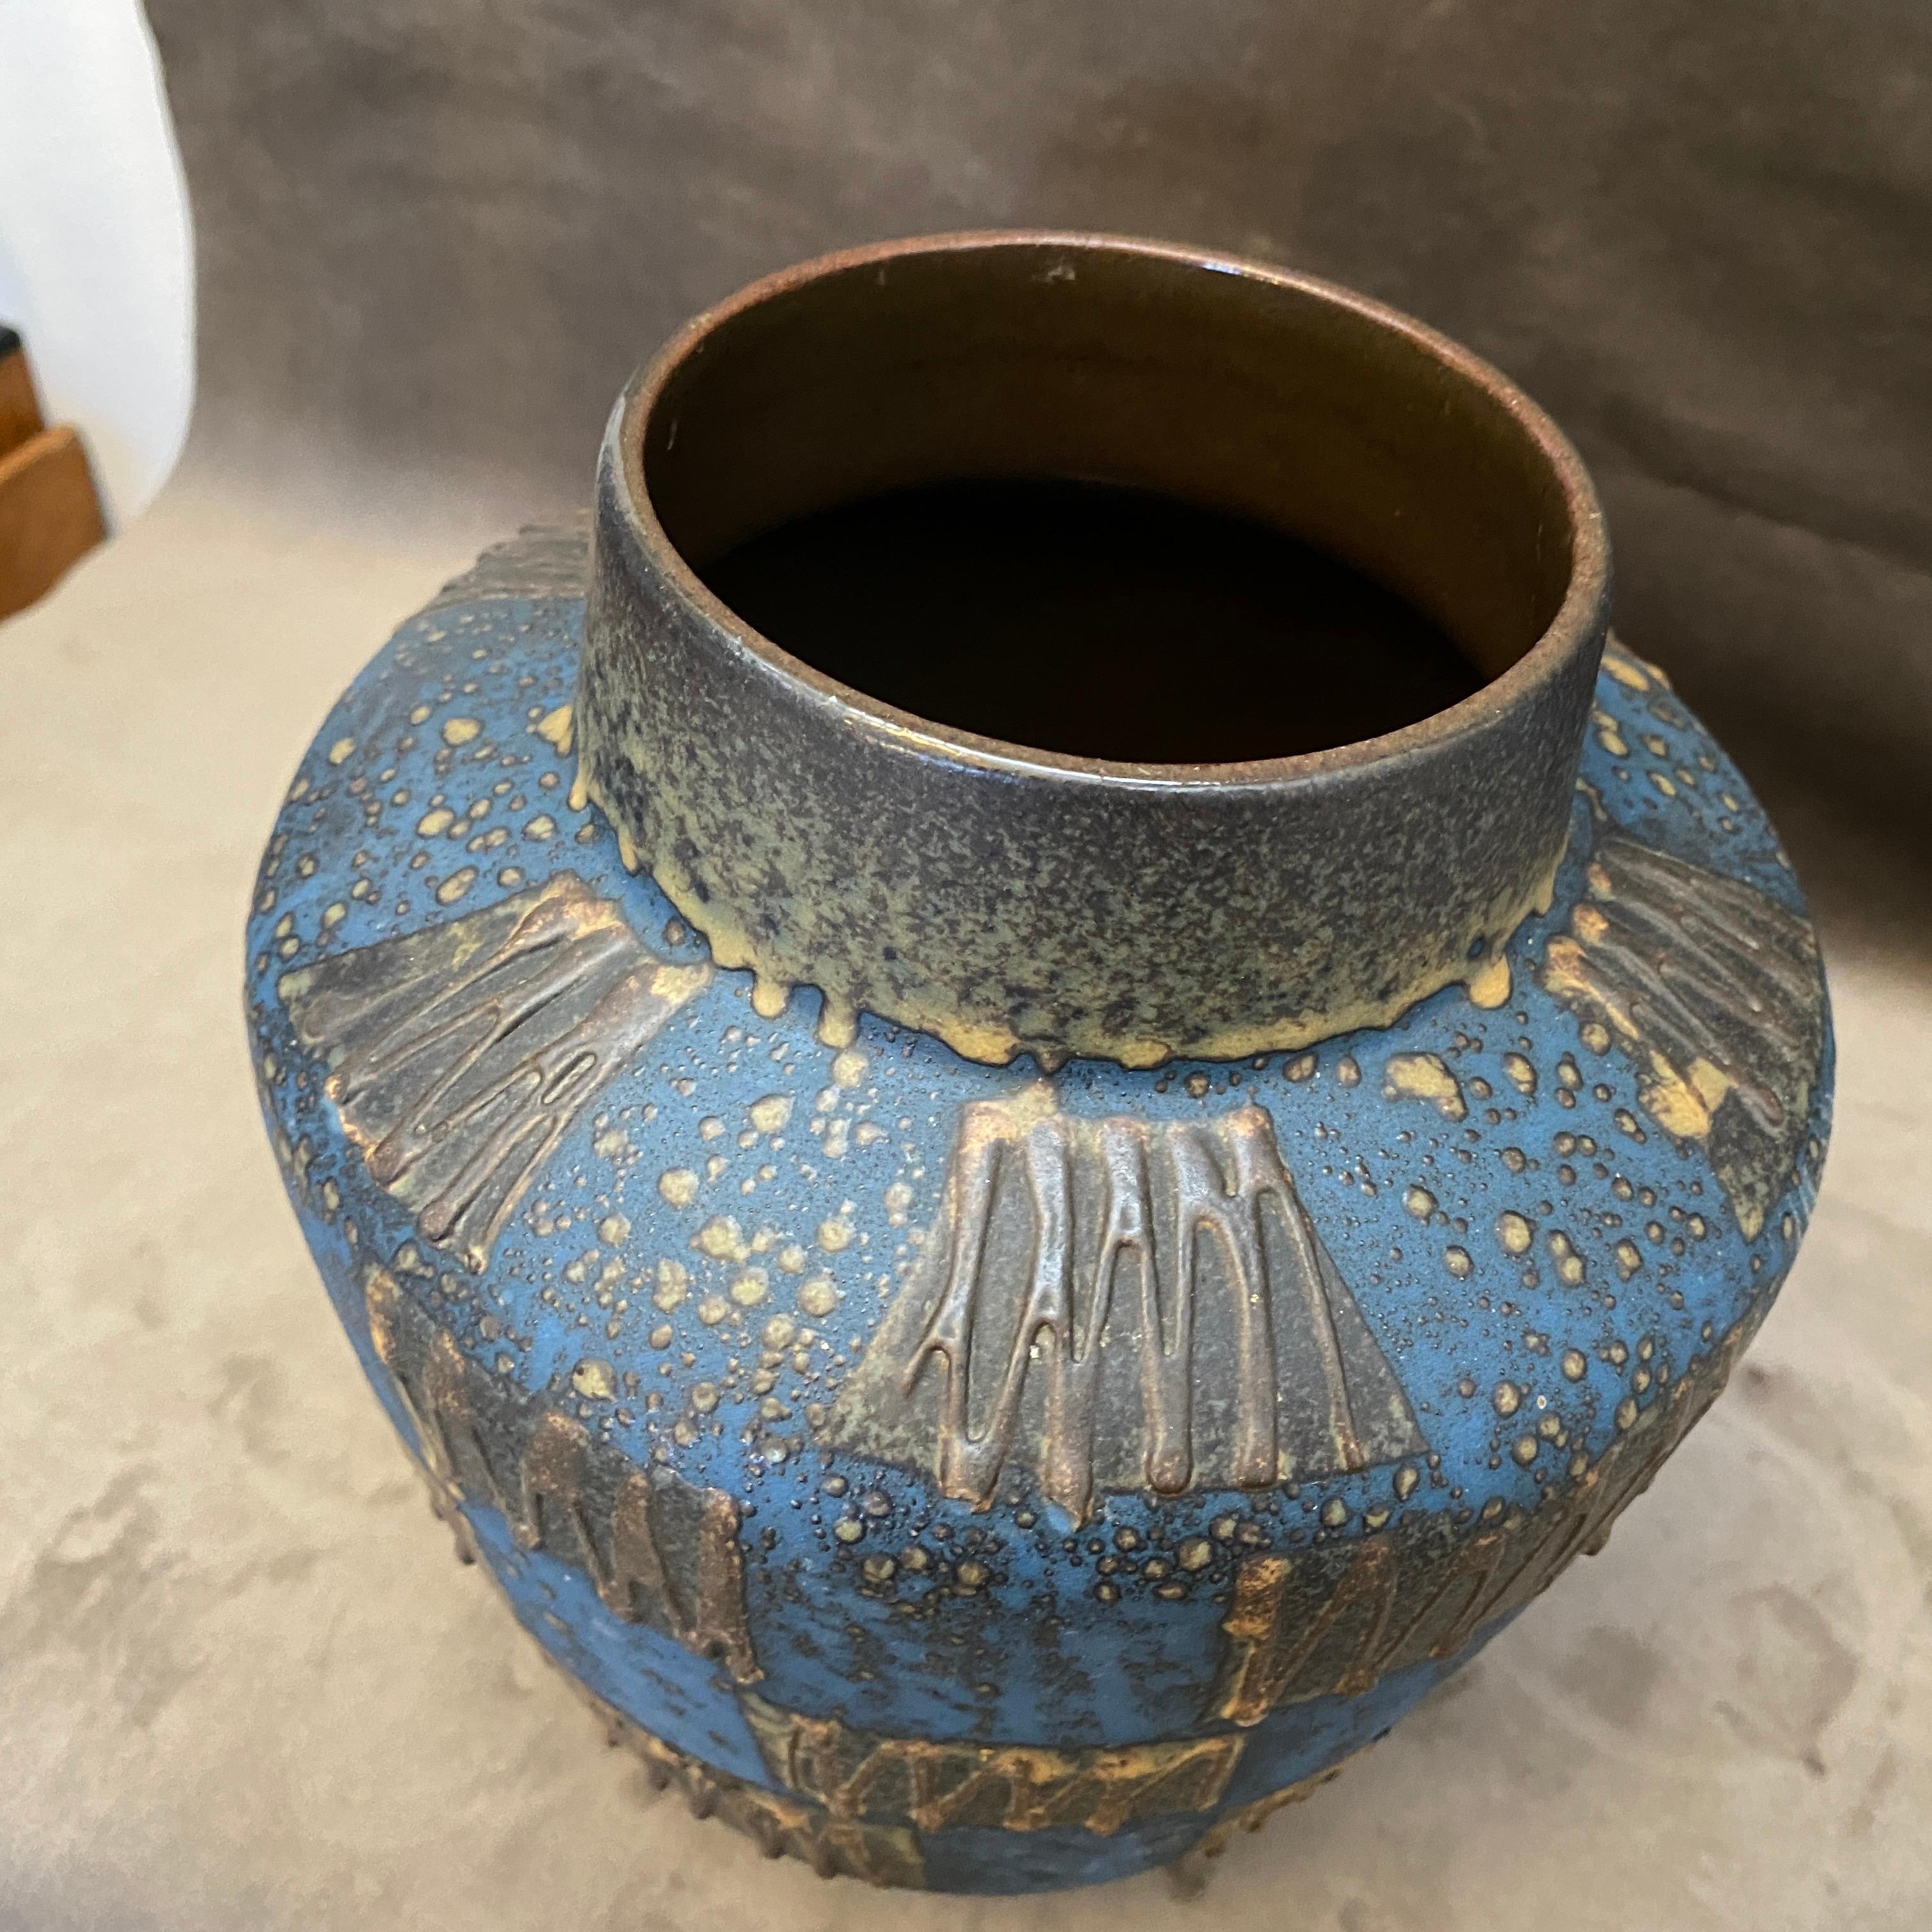 A blue and gray fat lava keramik vase made in the Seventies, it's in perfect condition.